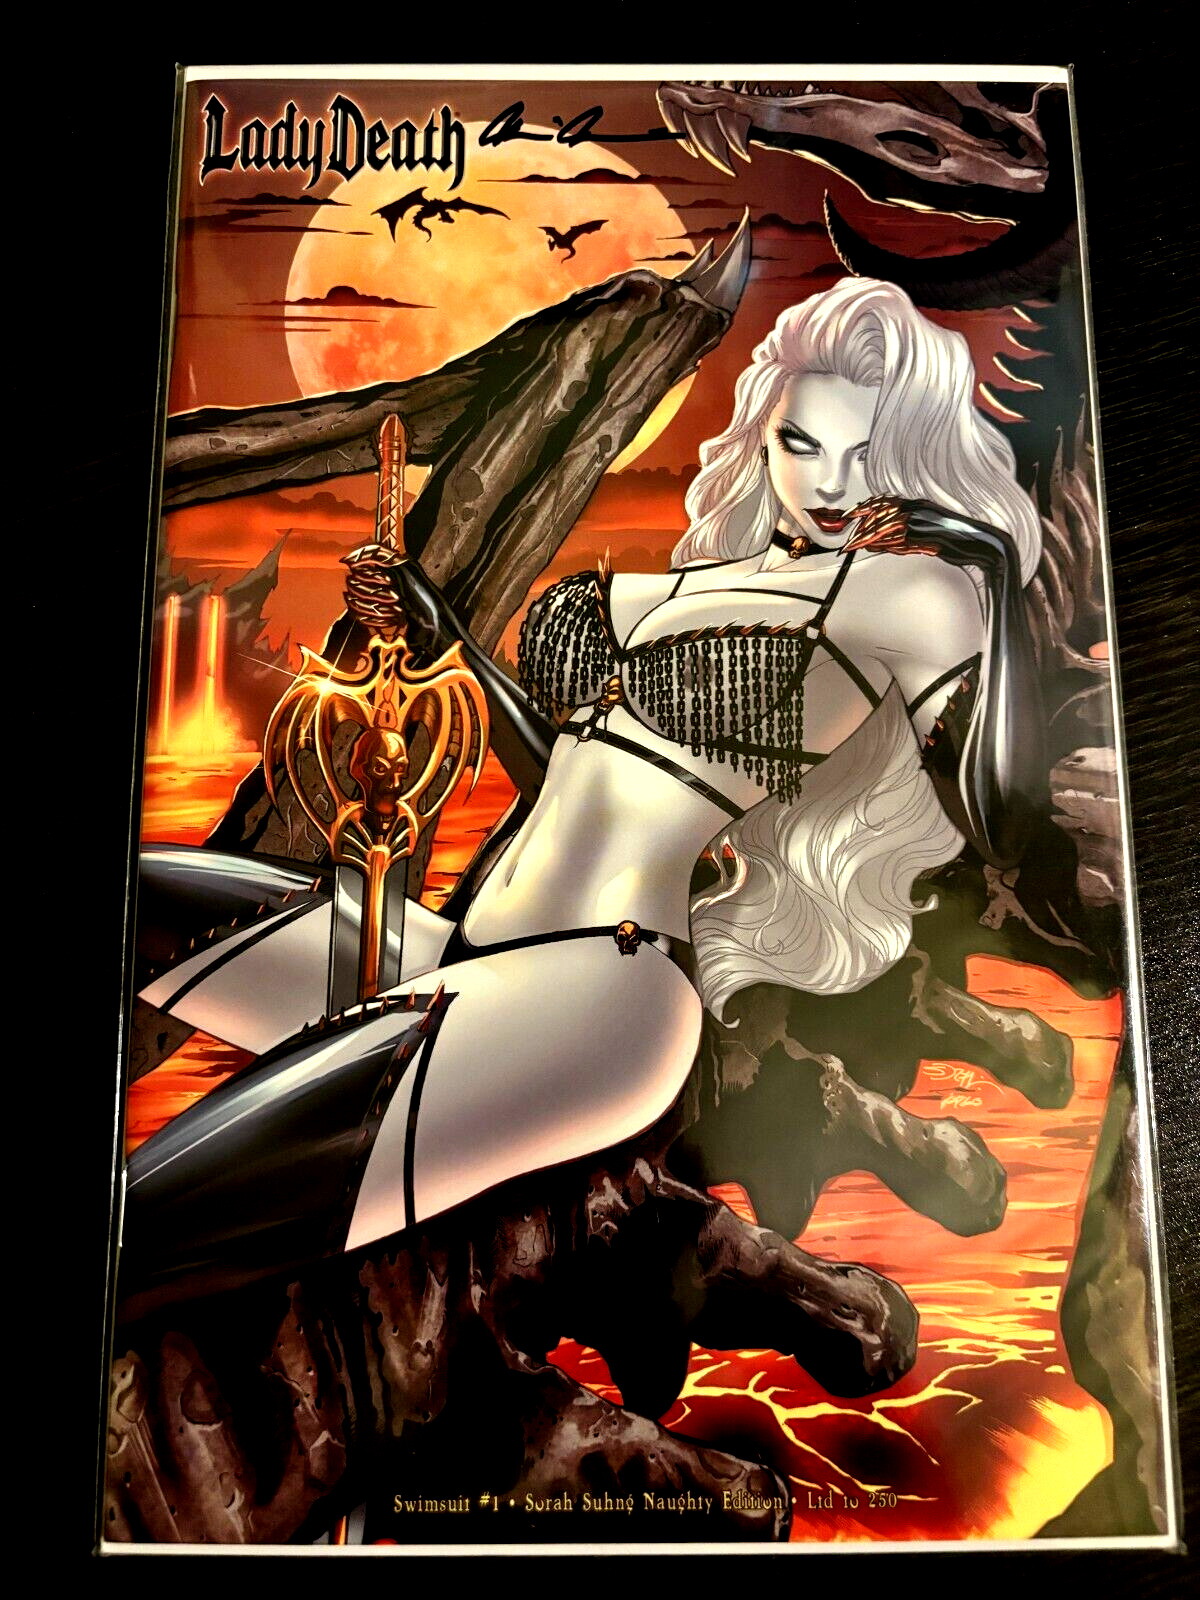 LADY DEATH #1 SWIMSUIT SORAH SUHNG NAUGHTY EDITION SIGNED COA LTD 250 NM+